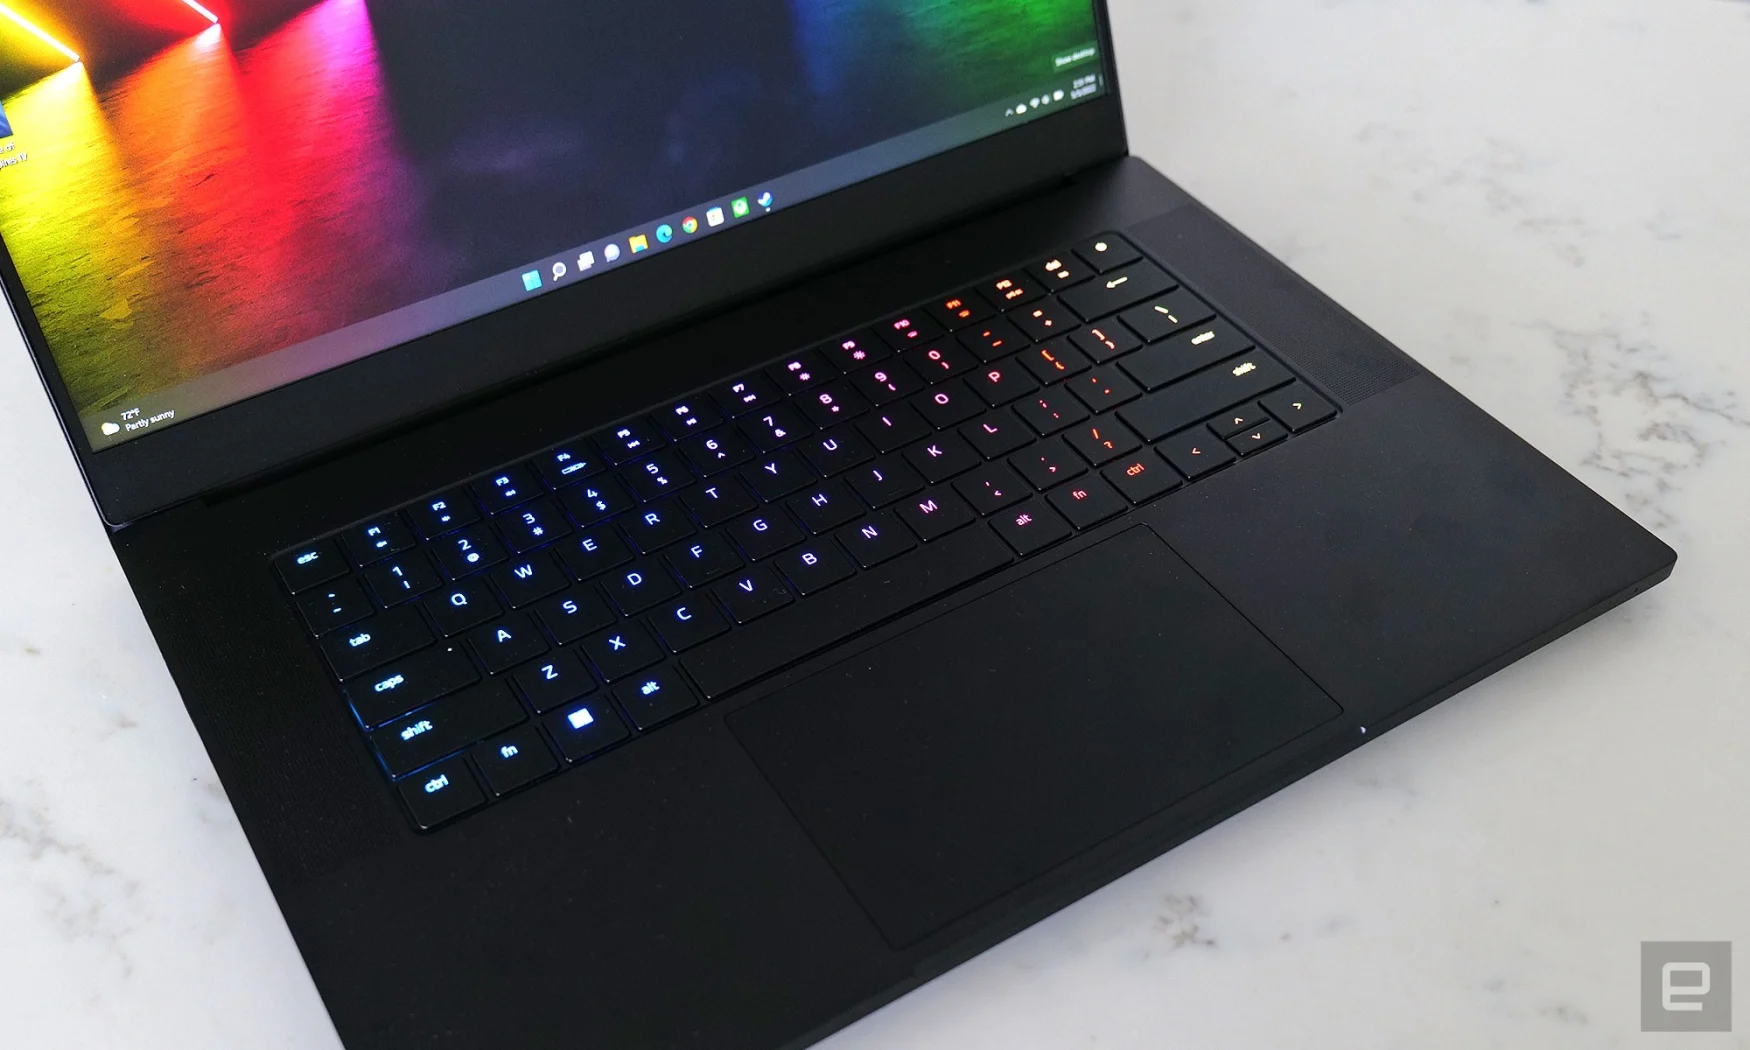 As you'd expect from Razer, the latest Blade 15's keyboard supports per-key RGB lighting.